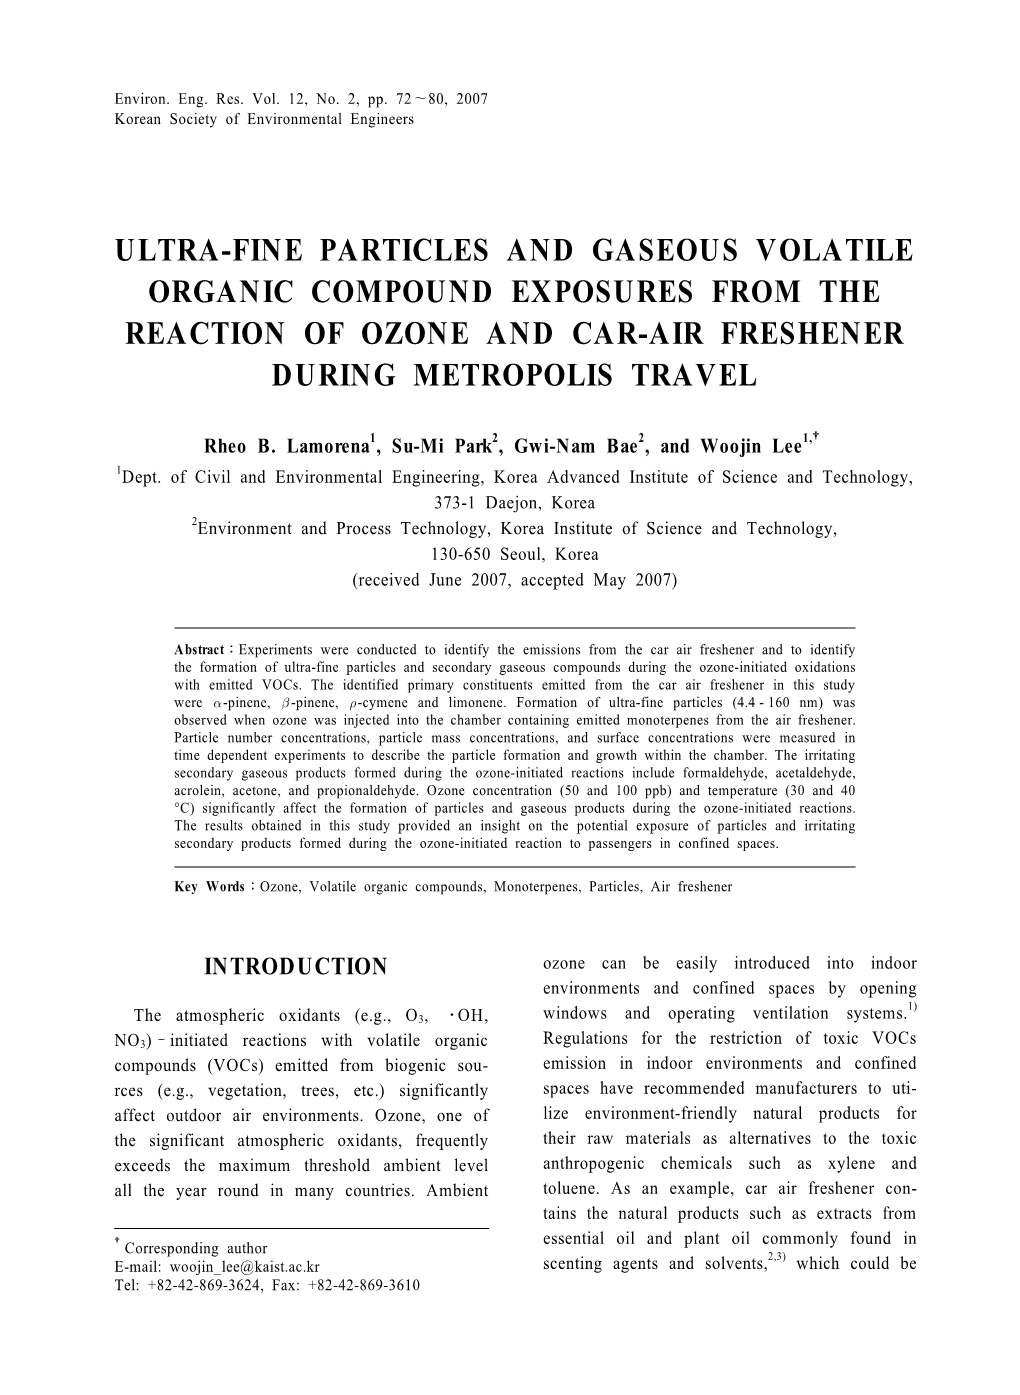 Ultra-Fine Particles and Gaseous Volatile Organic Compound Exposures from the Reaction of Ozone and Car-Air Freshener During Metropolis Travel